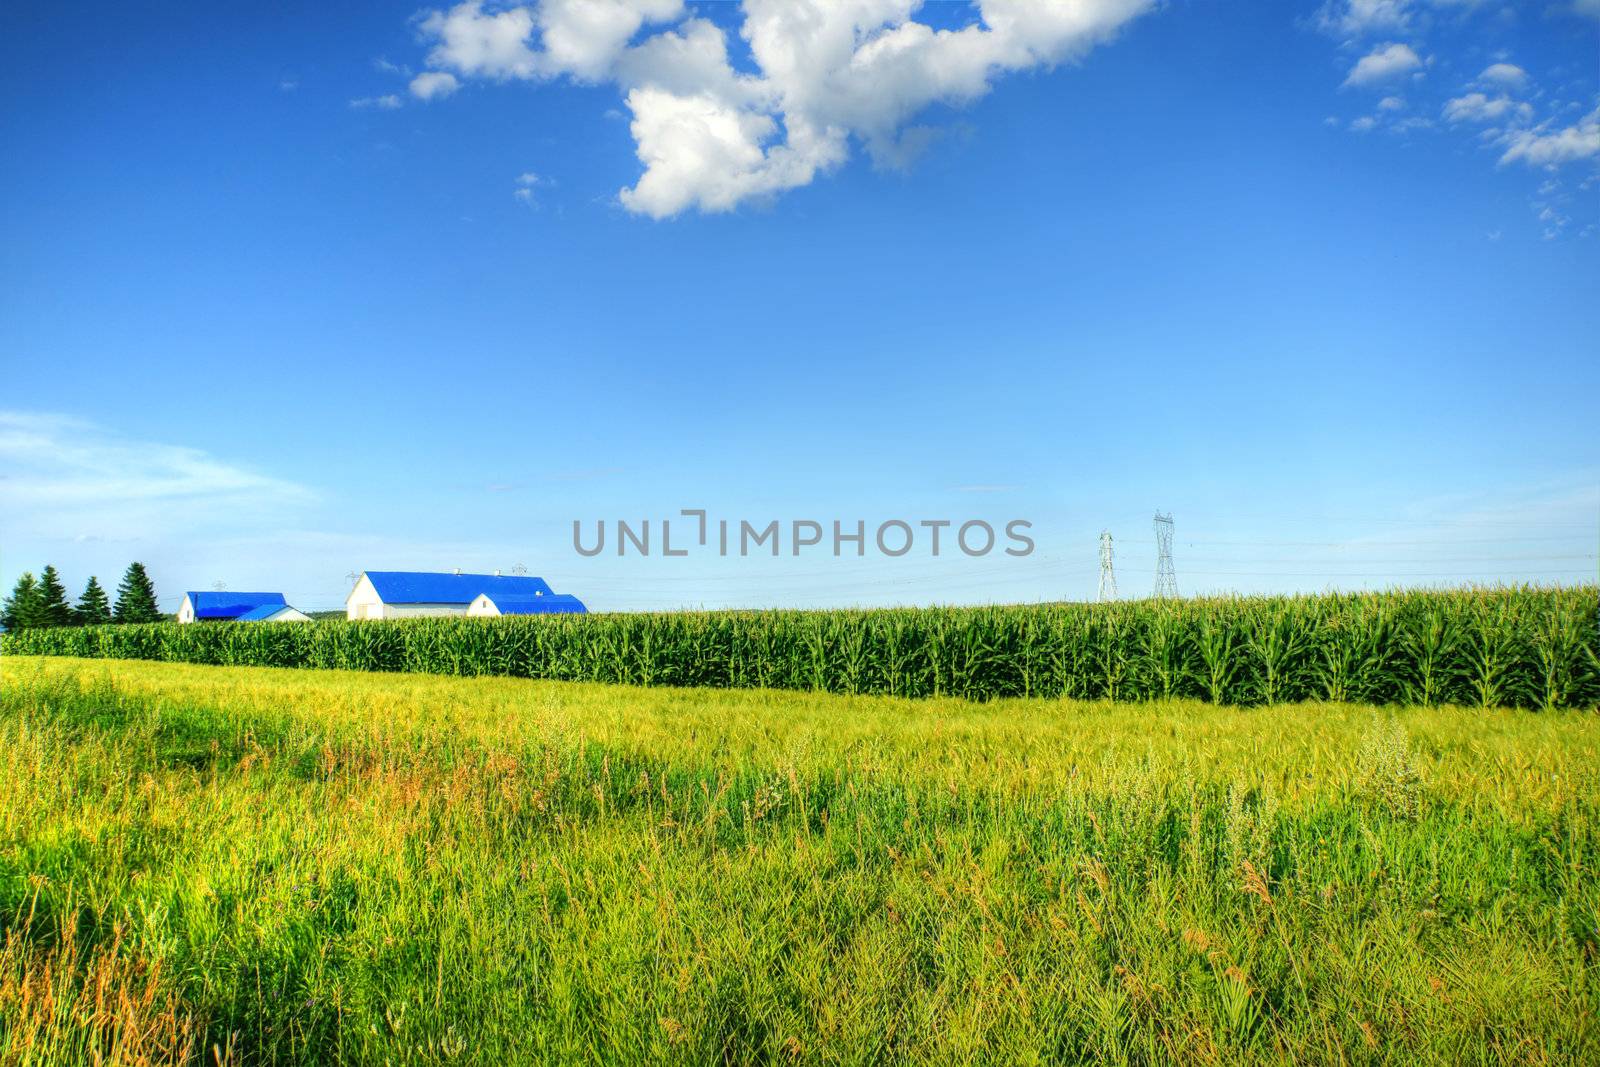 Rural landscape with grown corn field hiding the farm and barns and electricity pylons and cables, vivid hdr rendering.